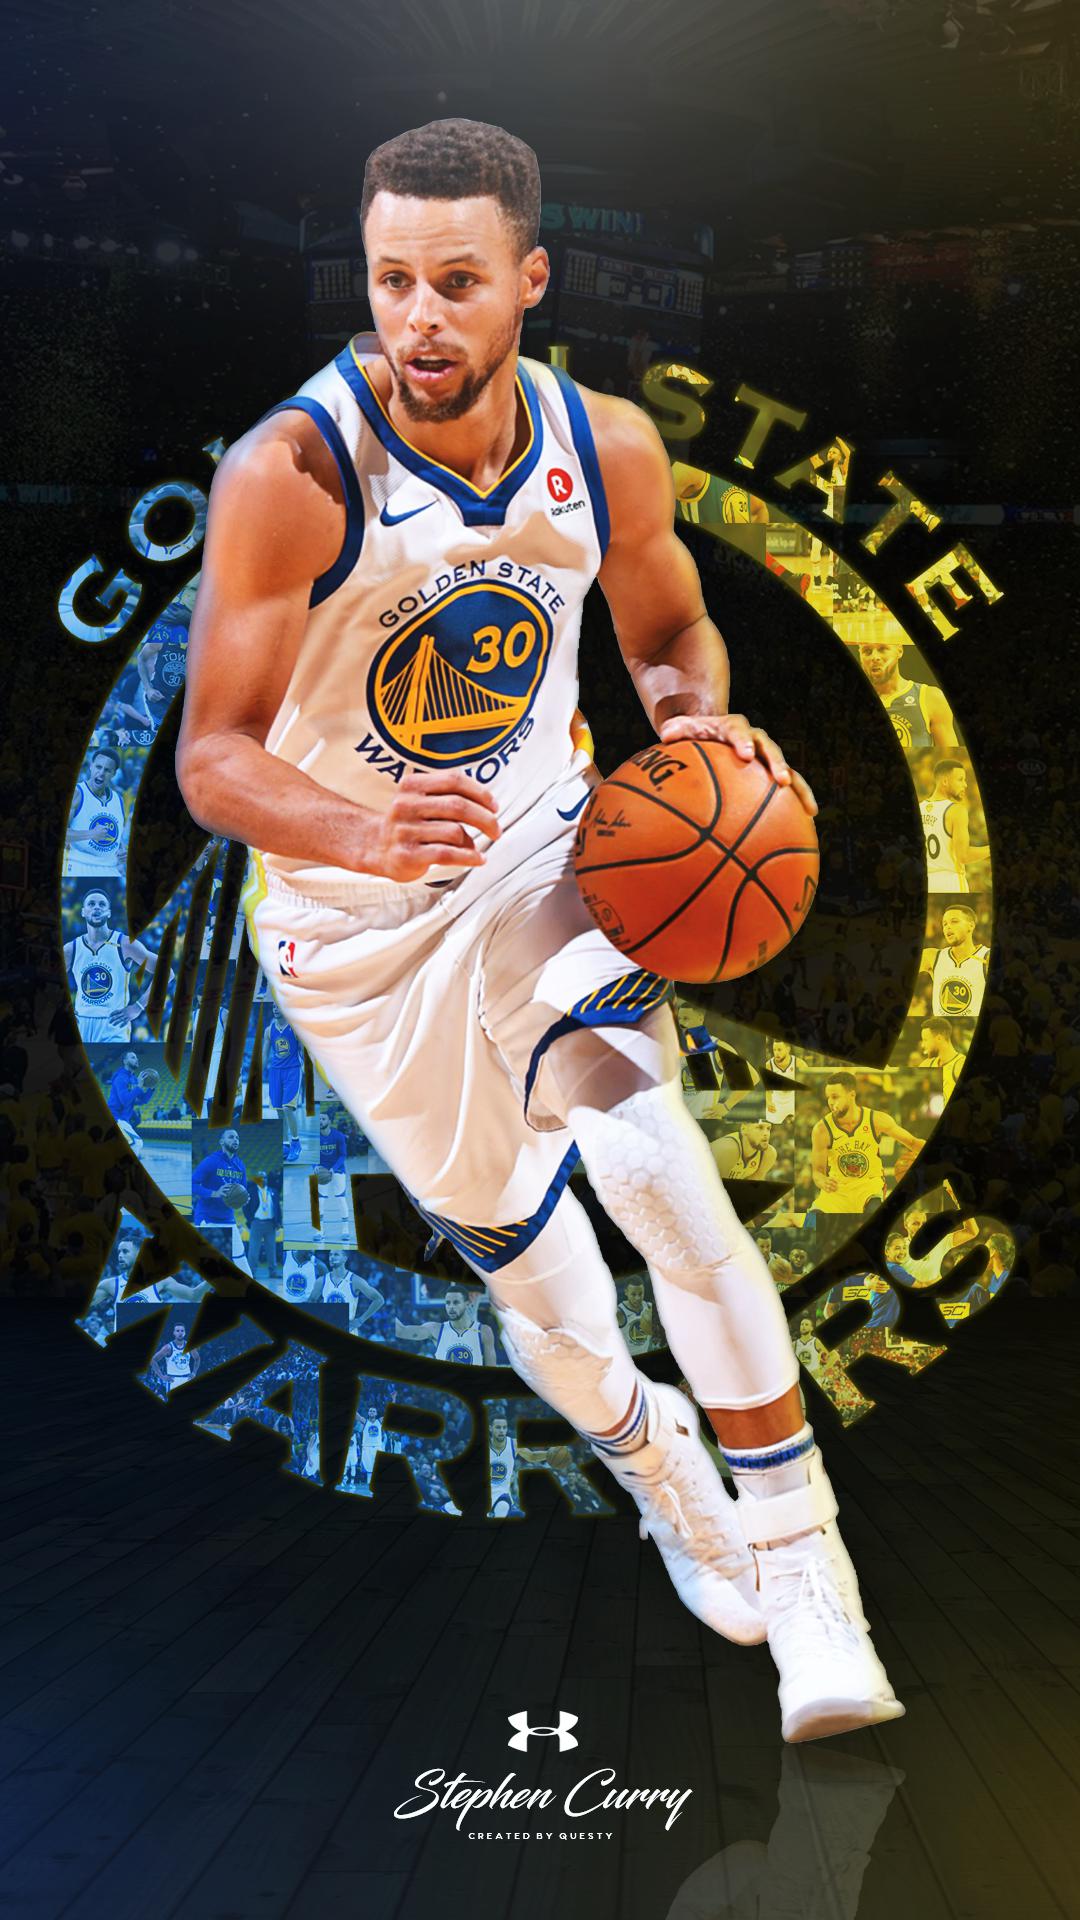 Stephen Curry Wallpaper Iphone - KoLPaPer - Awesome Free HD Wallpapers